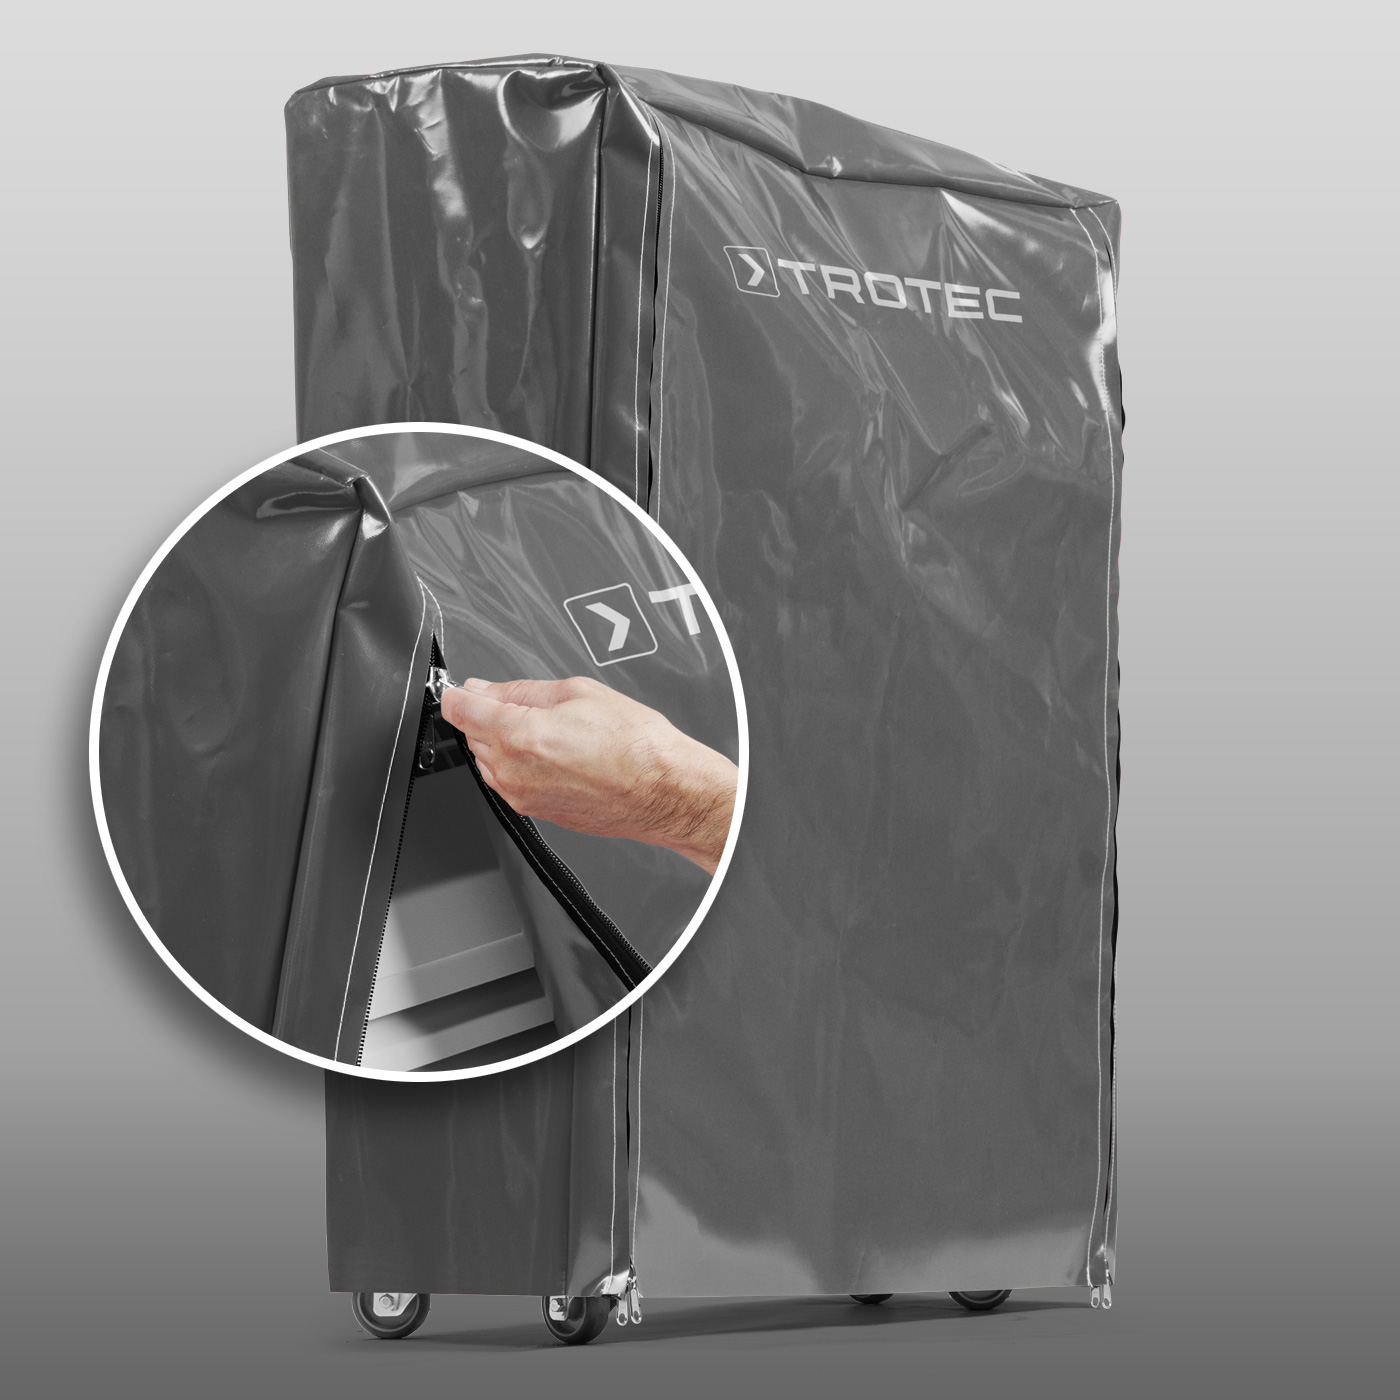 Weather protection cover available as accessory part